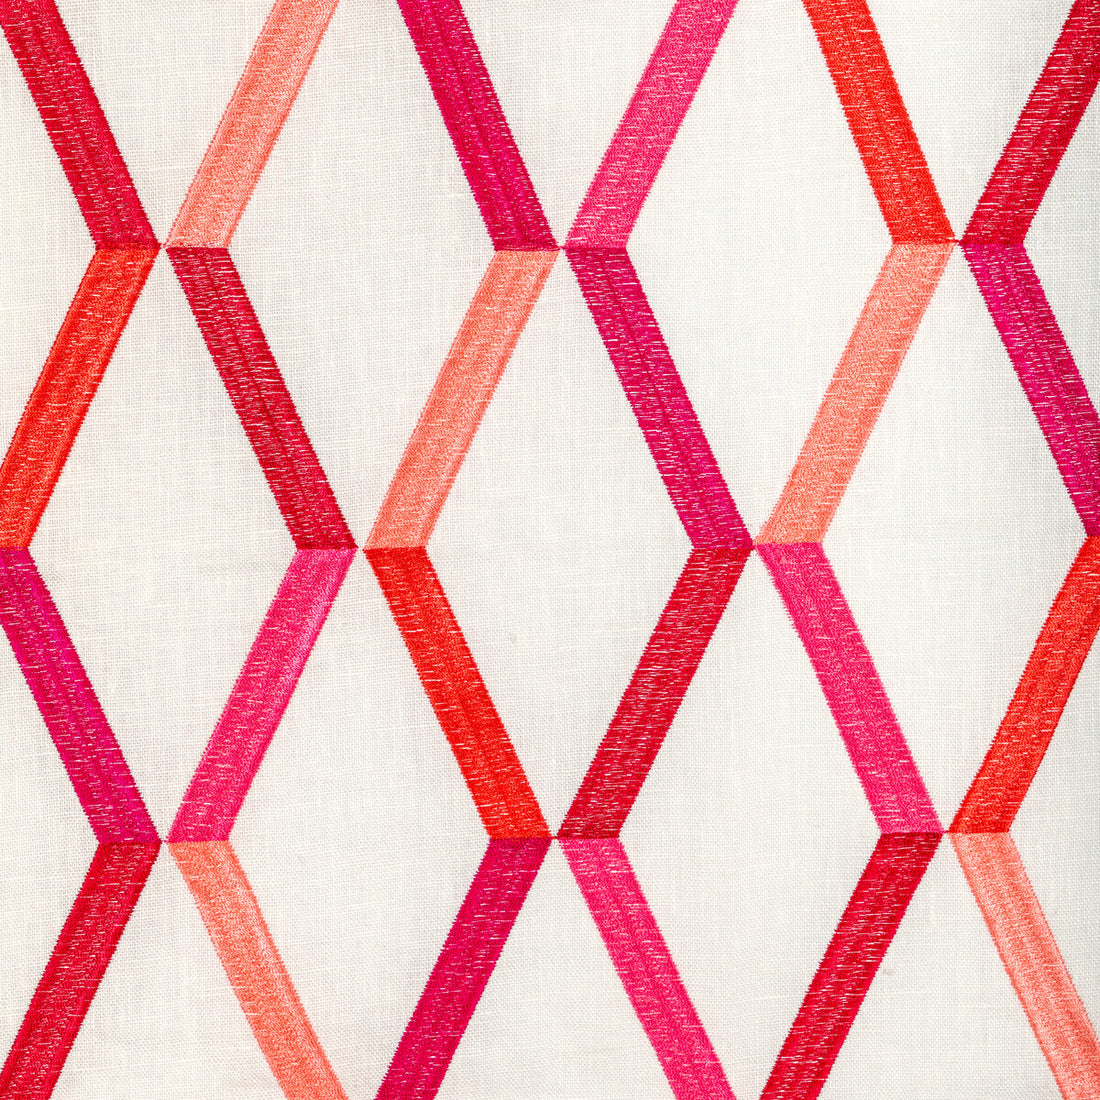 To The Max fabric in punch color - pattern 36316.716.0 - by Kravet Design in the Nadia Watts Gem collection